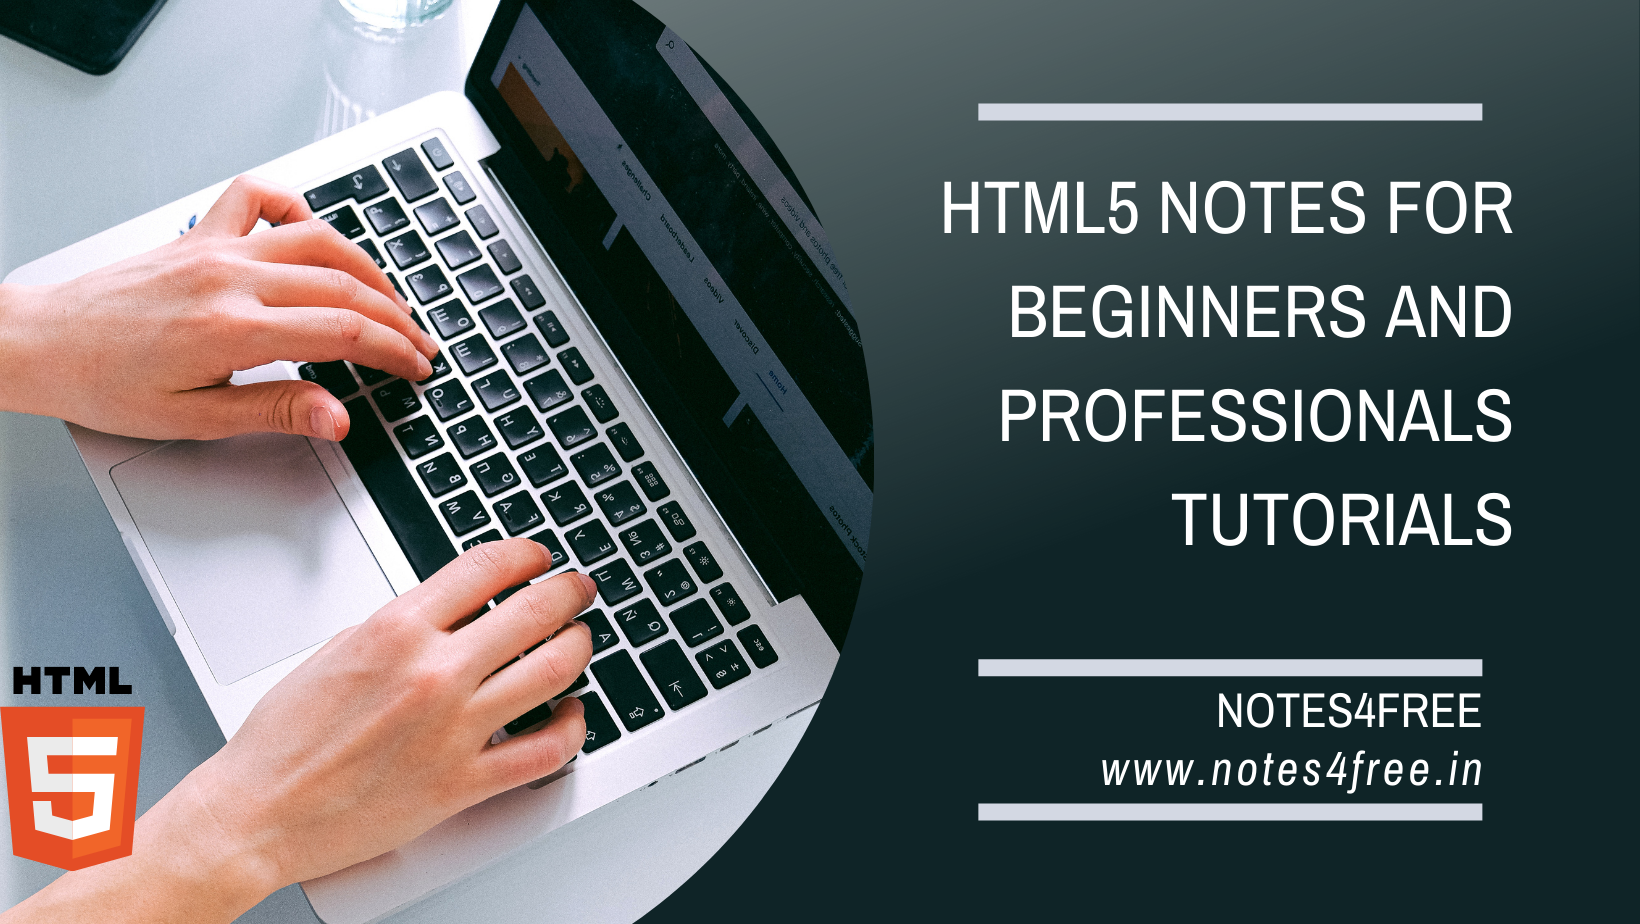 HTML5 Notes for beginners and Professionals books